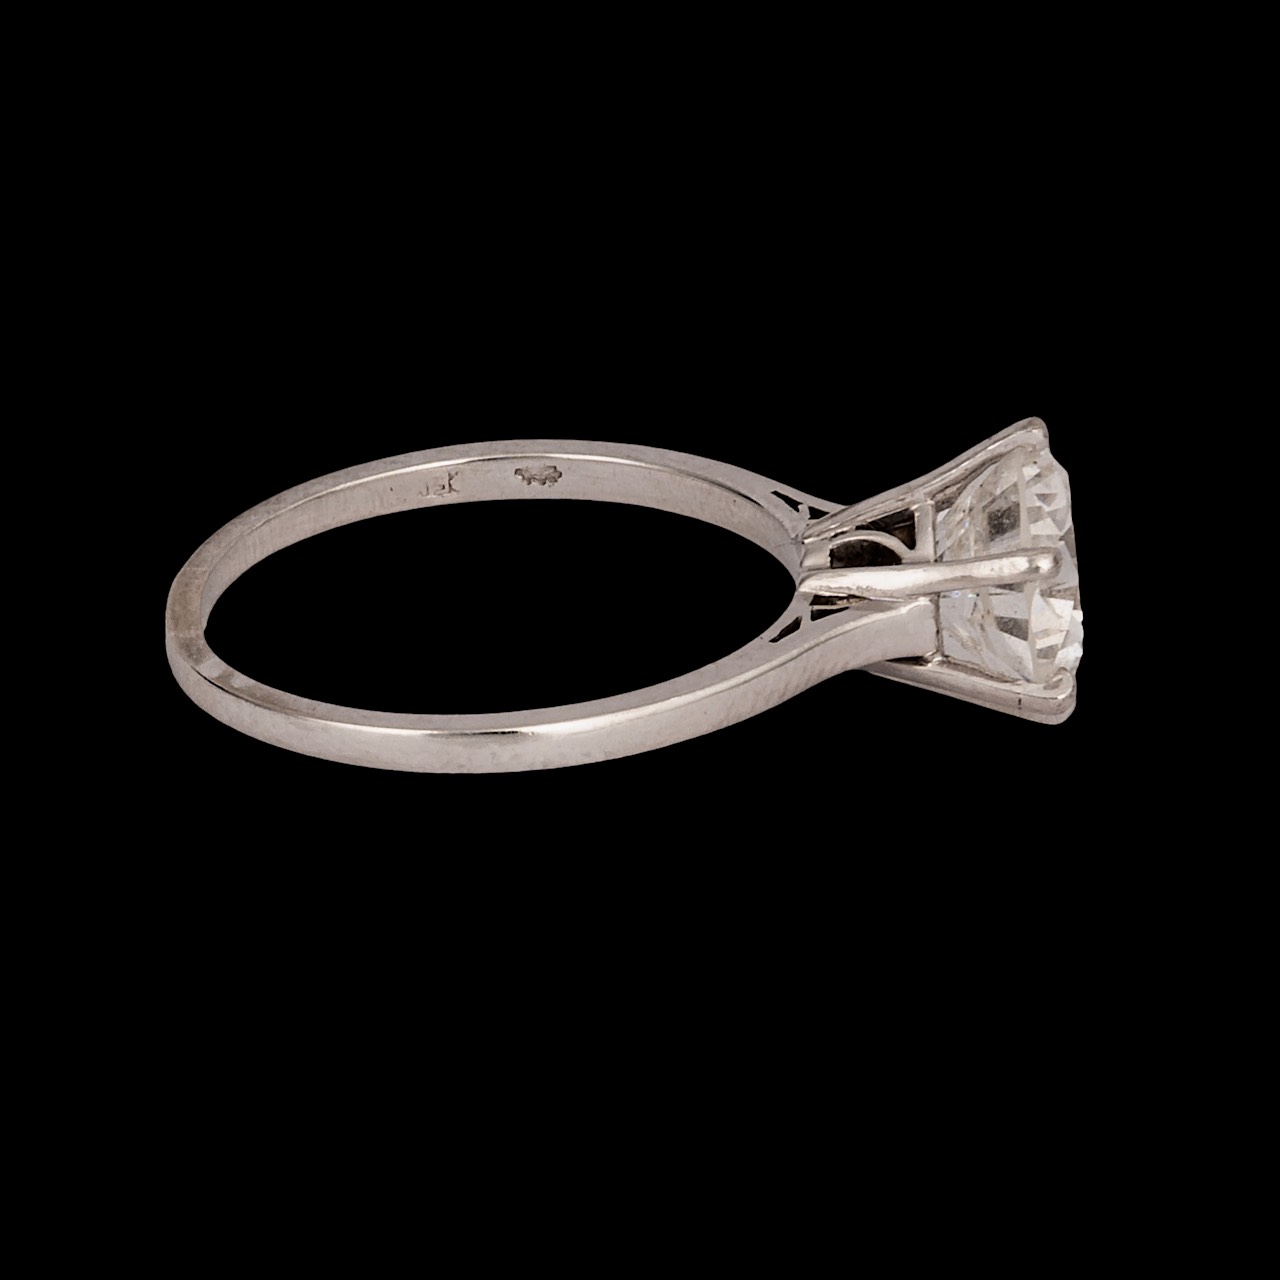 A fine 18ct white gold solitaire ring set with a 2,74 ct brilliant cut diamond - Image 3 of 5